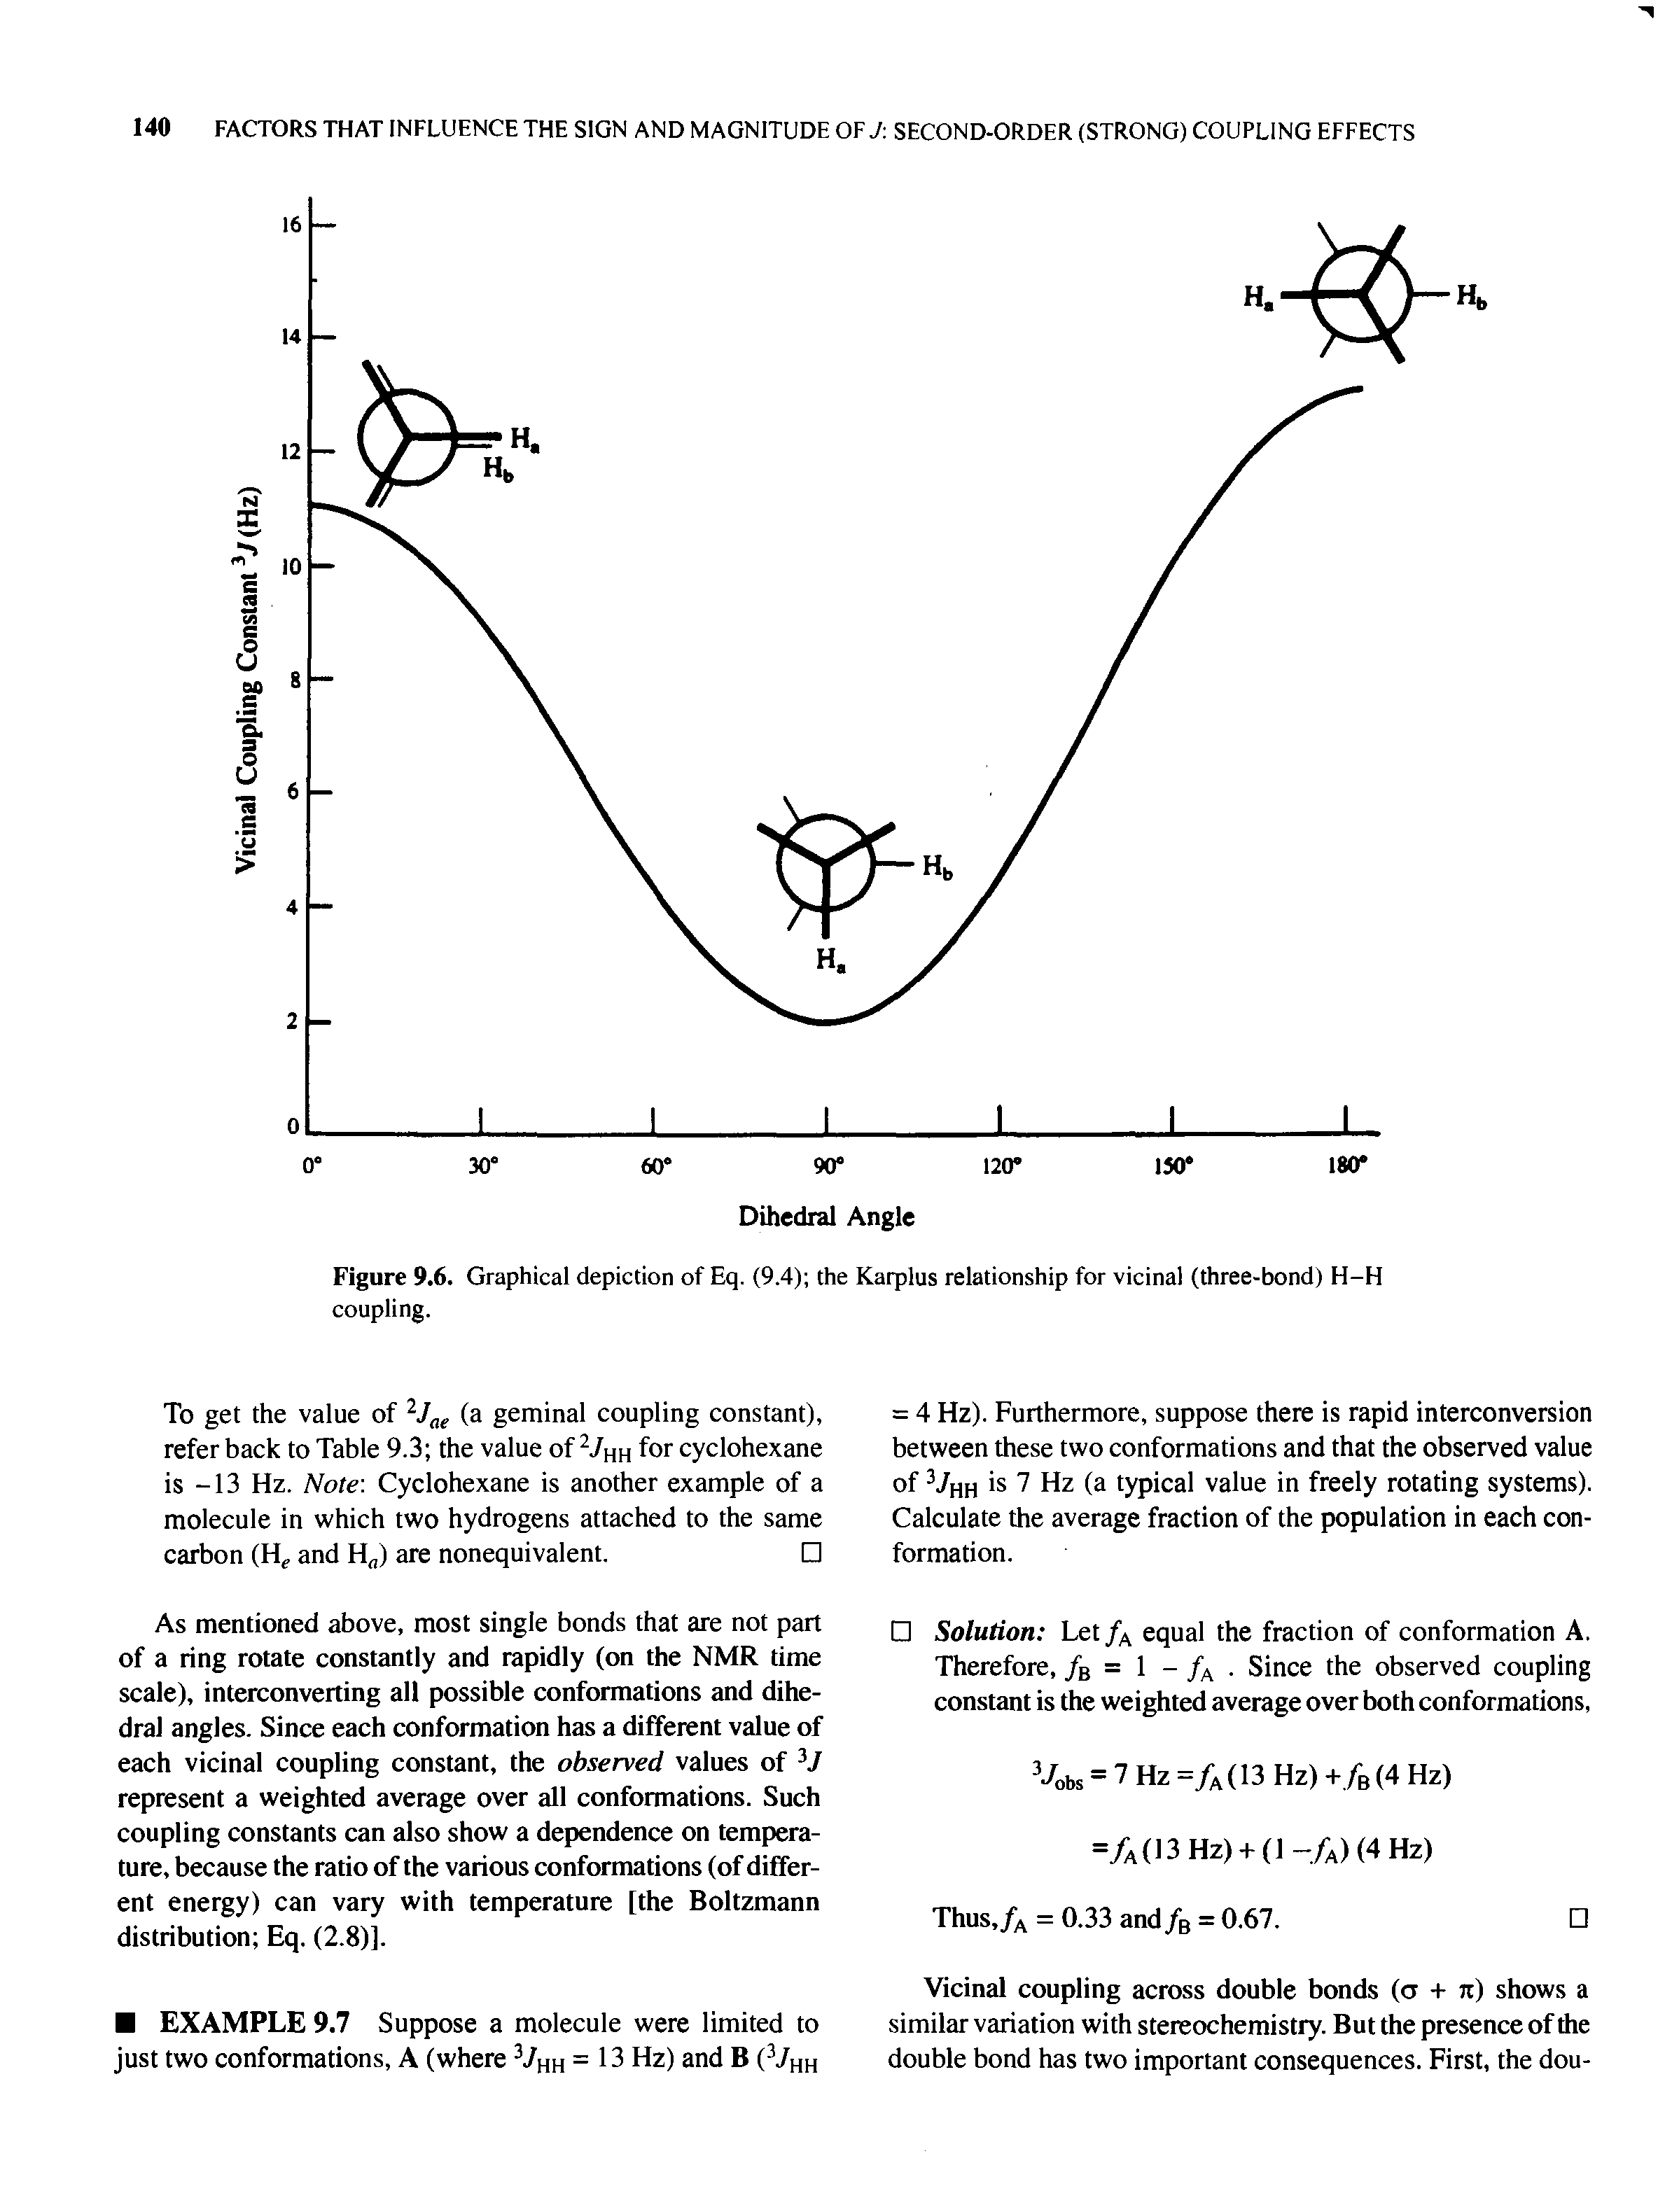 Figure 9.6. Graphical depiction of Eq. (9.4) the Karplus relationship for vicinal (three-bond) H-H coupling.